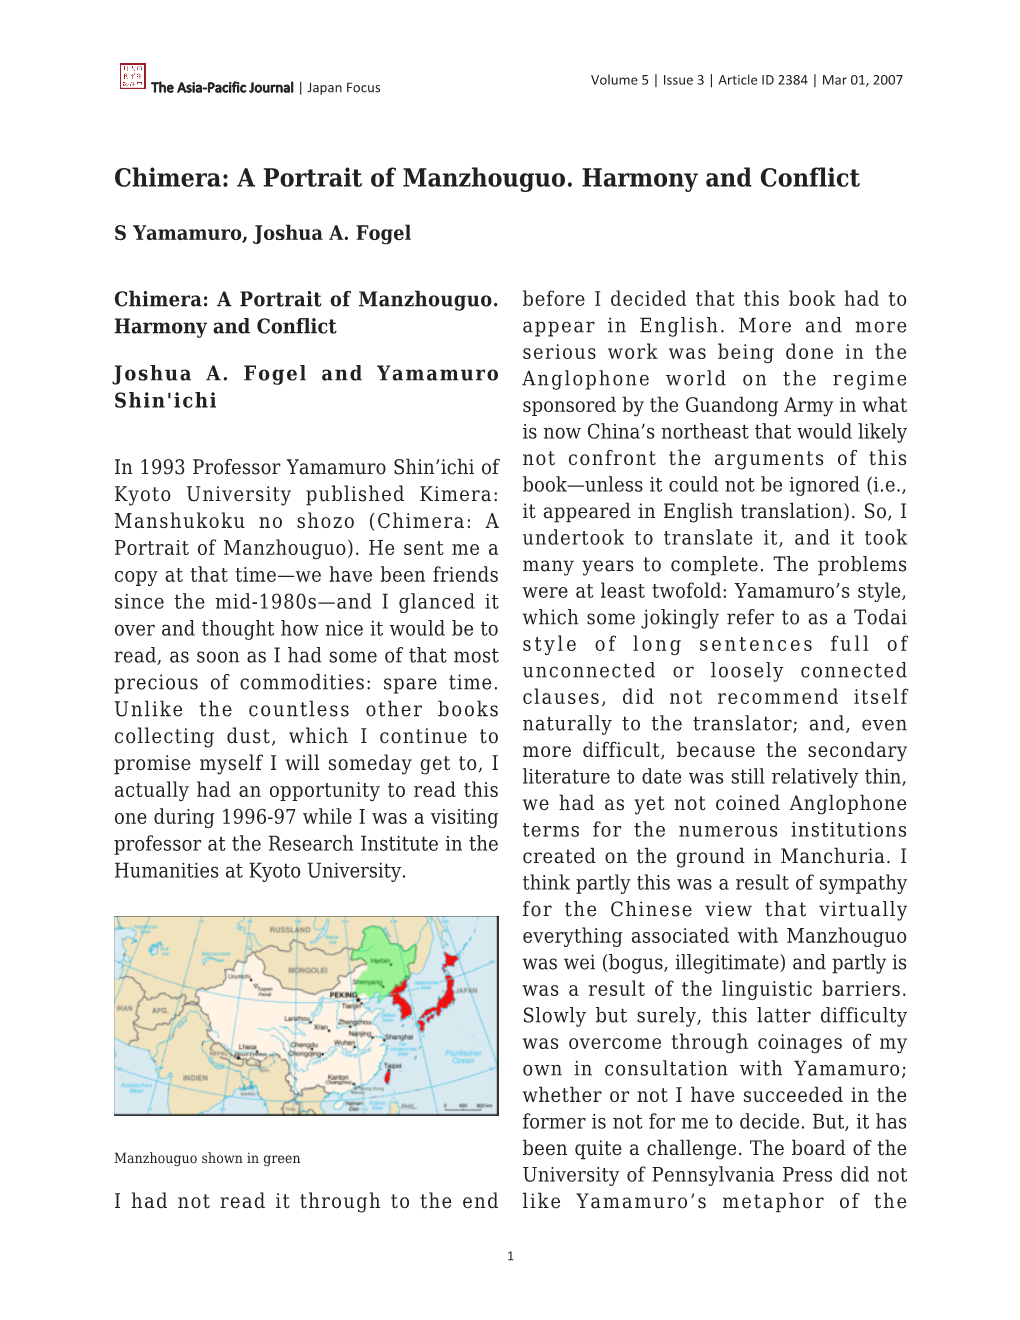 Chimera: a Portrait of Manzhouguo. Harmony and Conflict